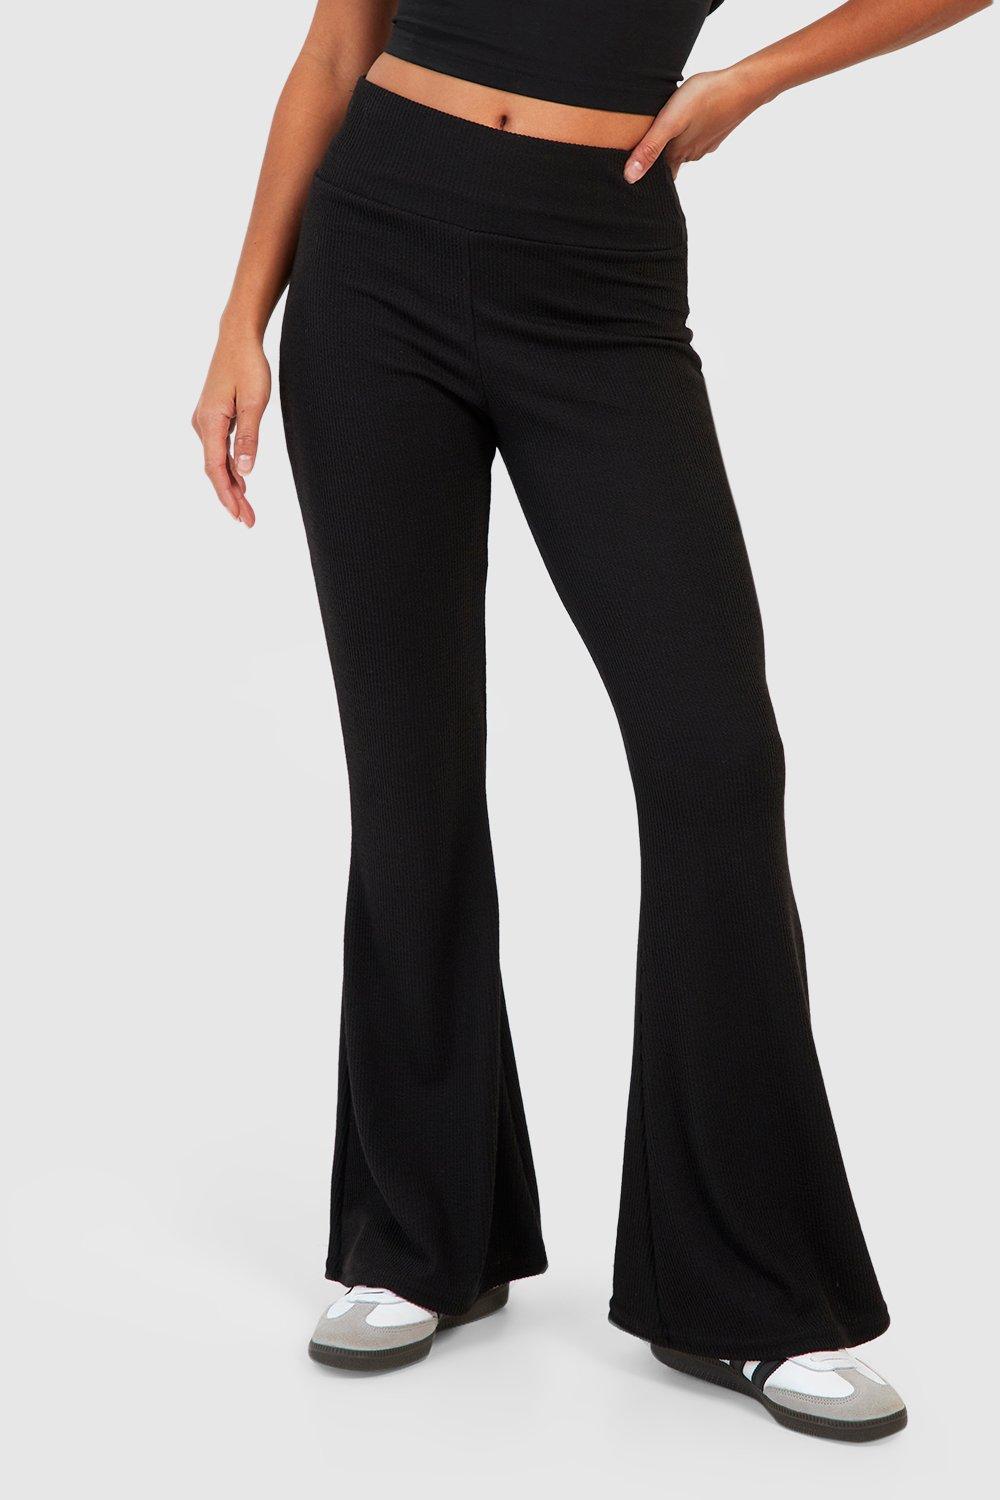 Petite Flares For Women